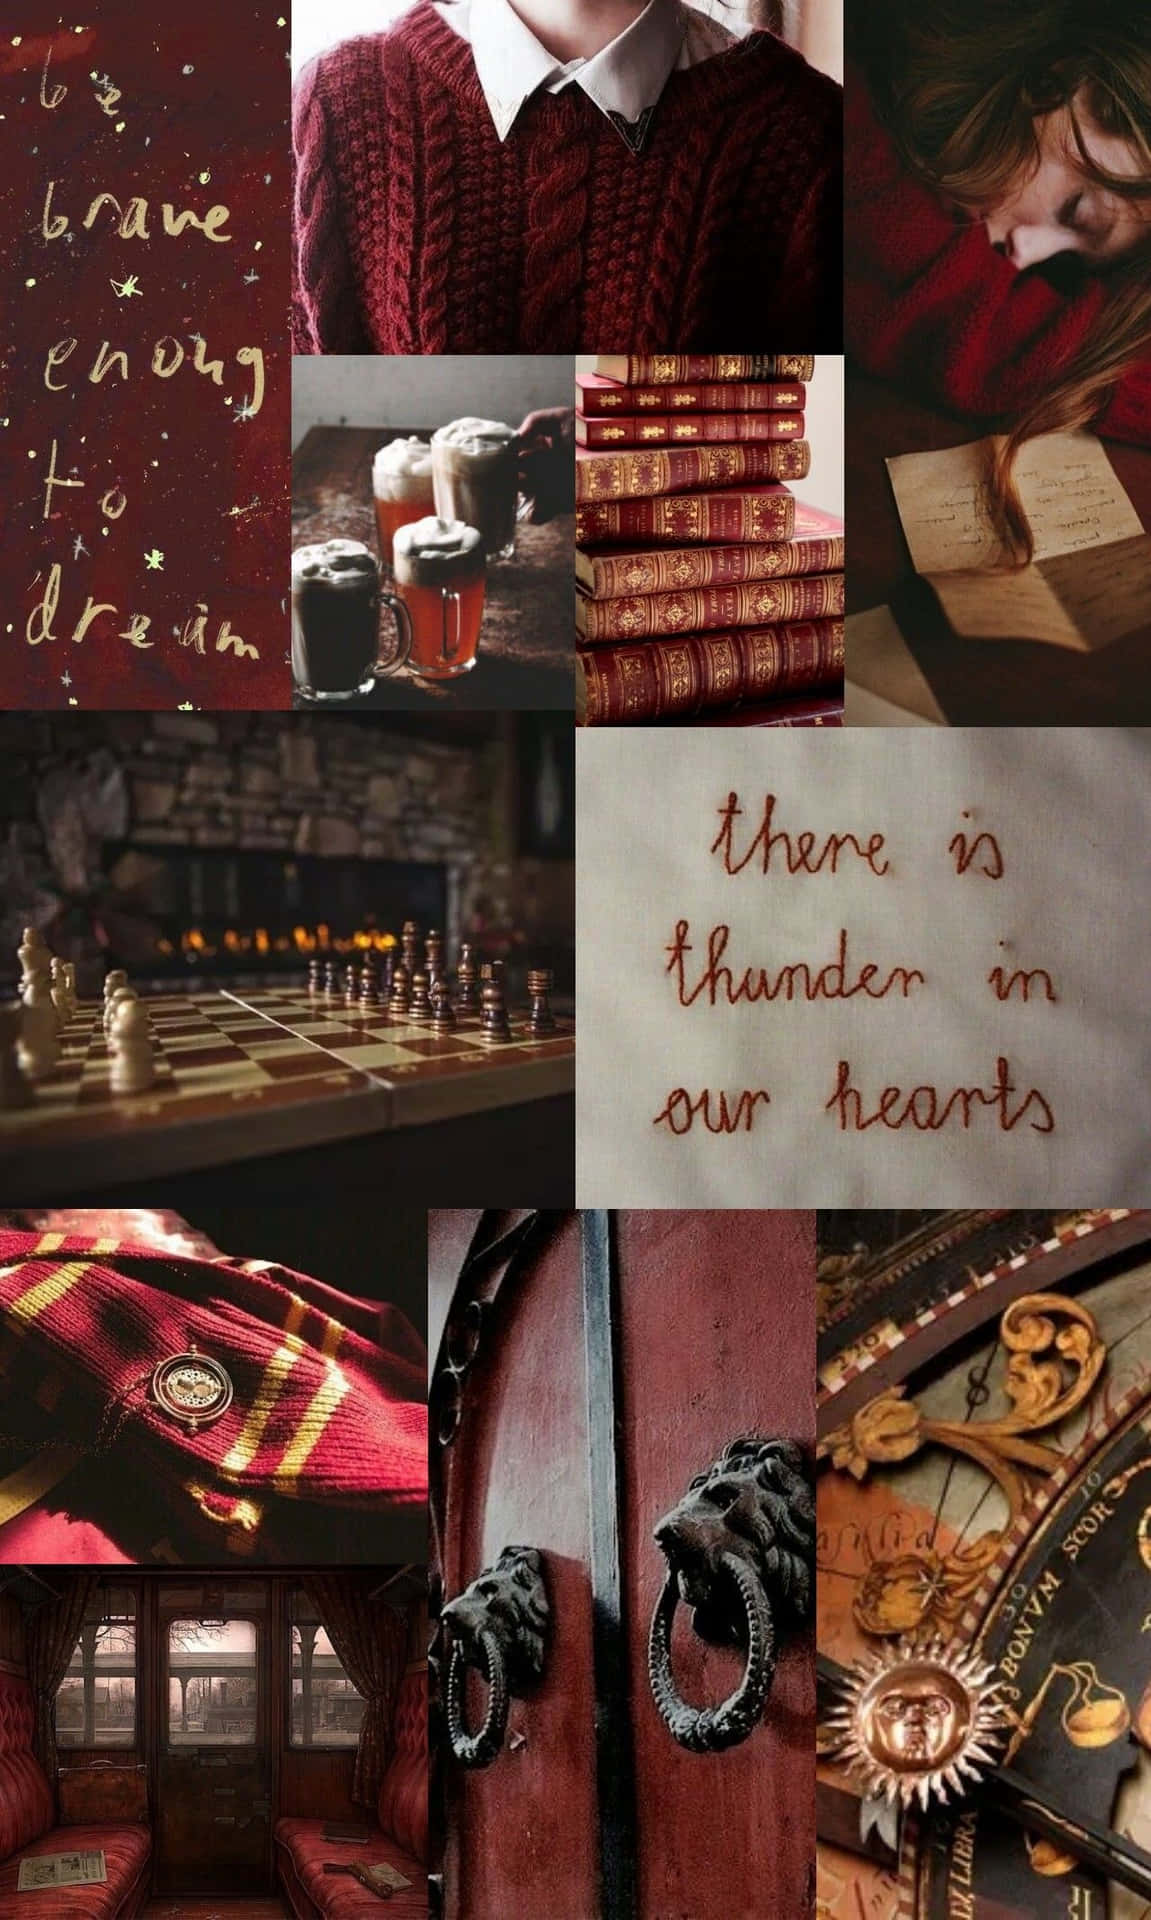 Harry Potter and the Aesthetics of Magic